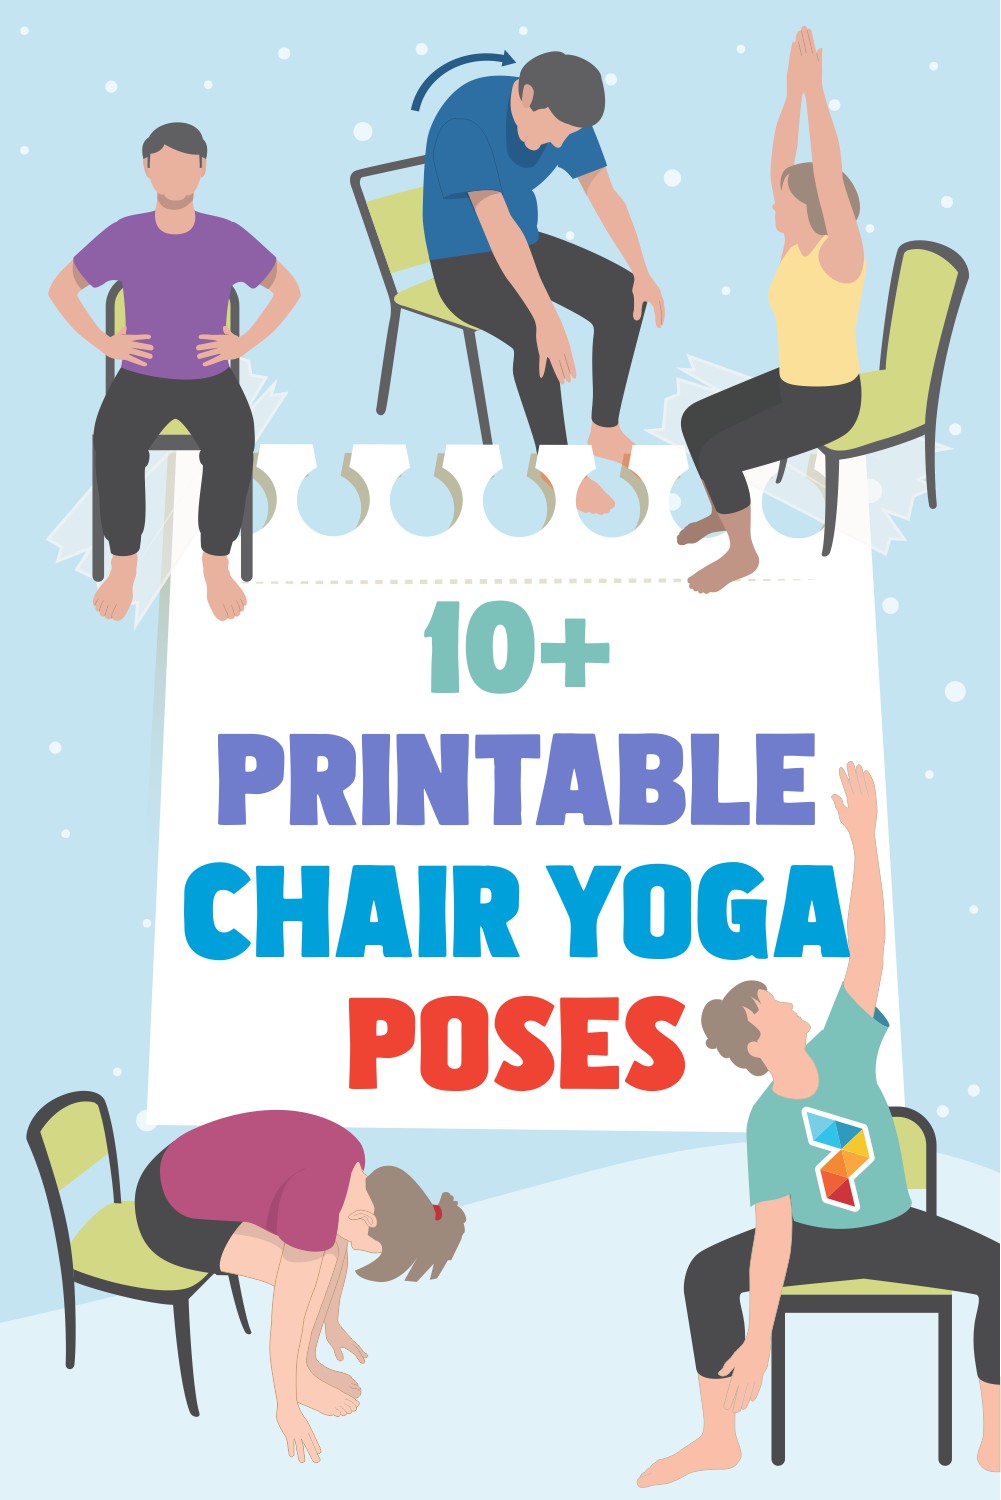 100,000 Chair yoga poses Vector Images | Depositphotos